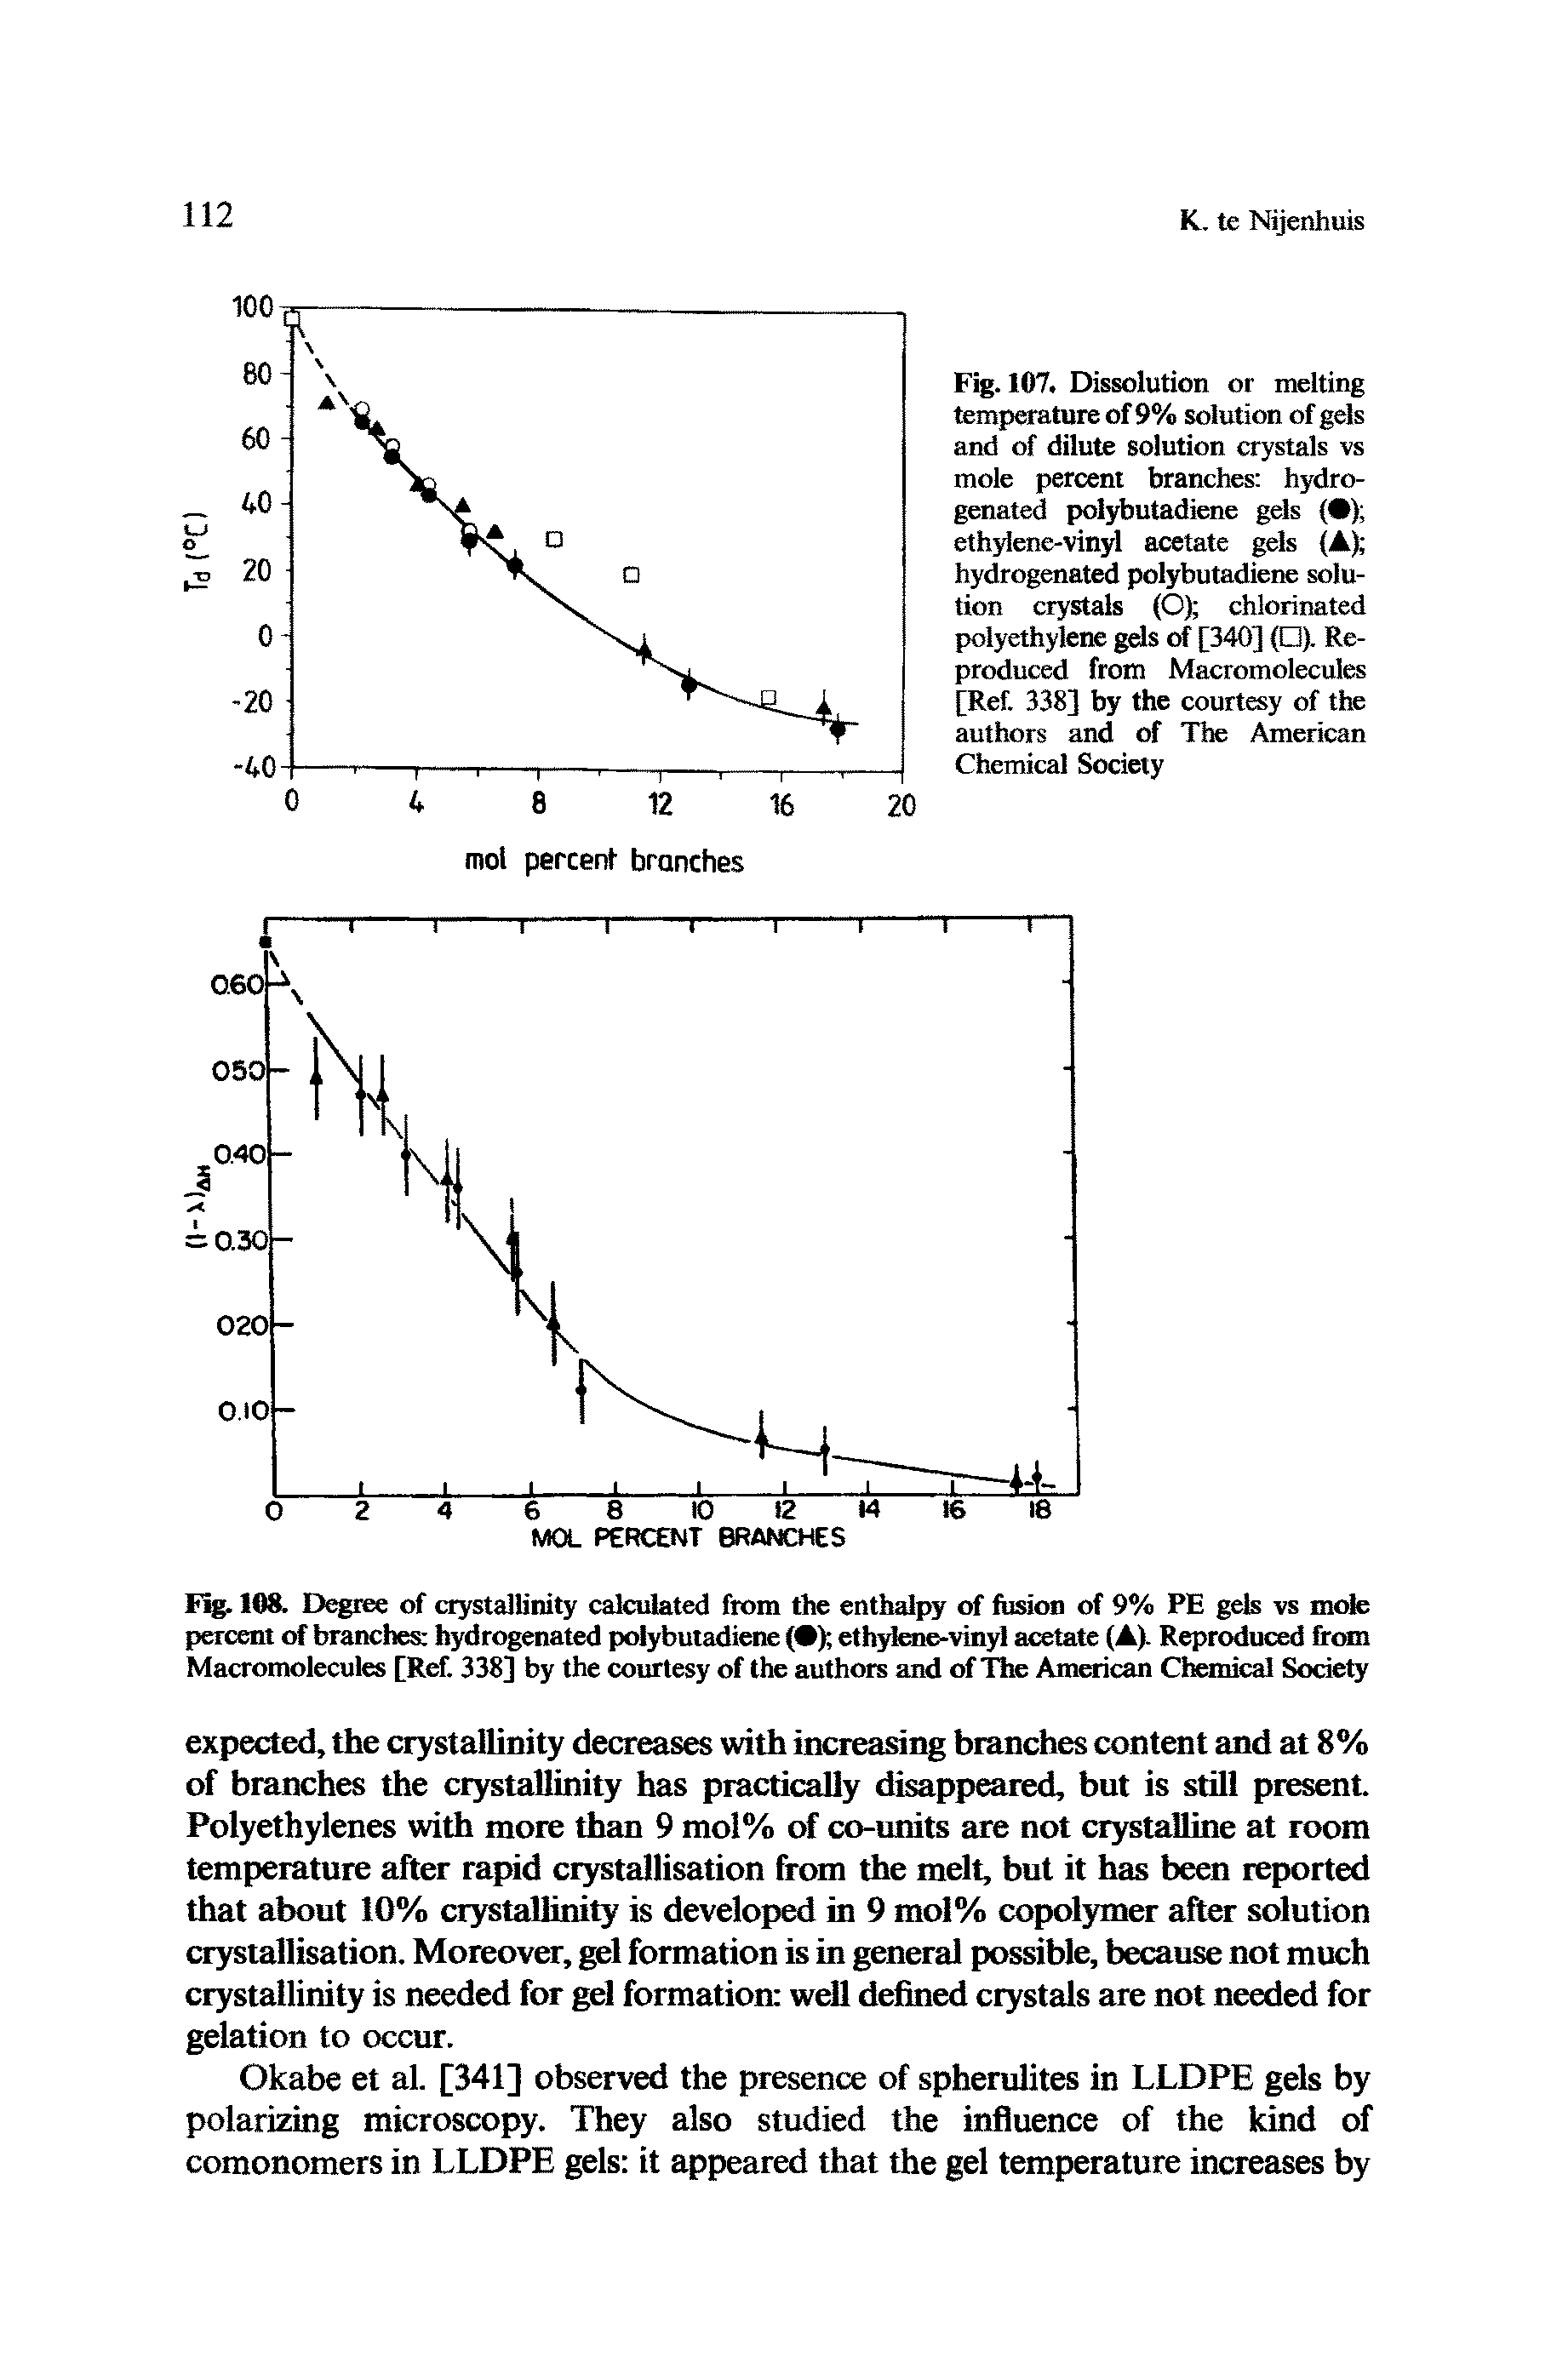 Fig. 108. Degree of crystallinity calculated from the enthalpy of fusion of 9% PE gels vs mole percent of branches hydrogenated polybutadiene ( ) ethylene-vinyl acetate (A). Reproduced from Macromolecules [Ref. 338] by the courtesy of the authors and of The American Chemical Society...